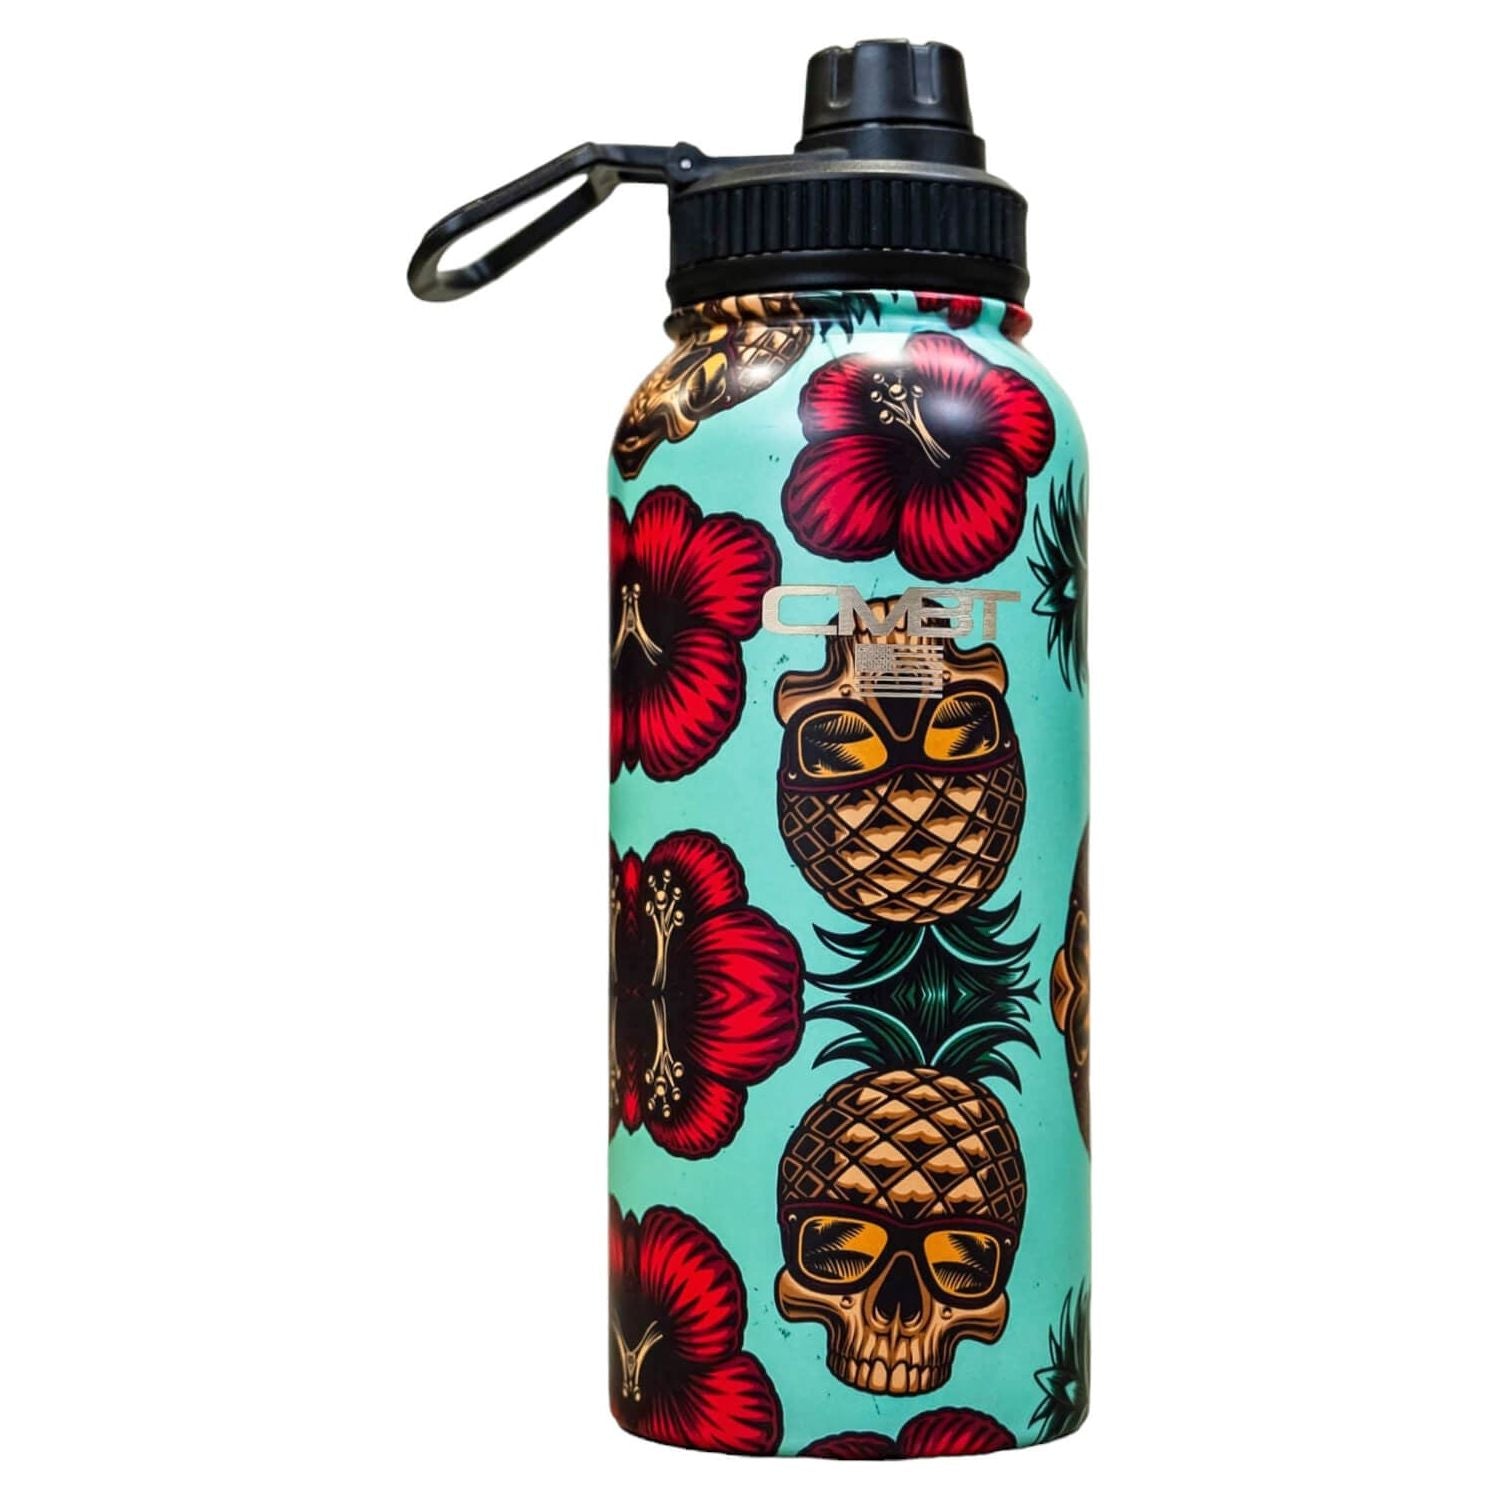 32oz Metal Insulated Hydration Bottle with Built in Drink Port V2 | Teal Pineapple Express